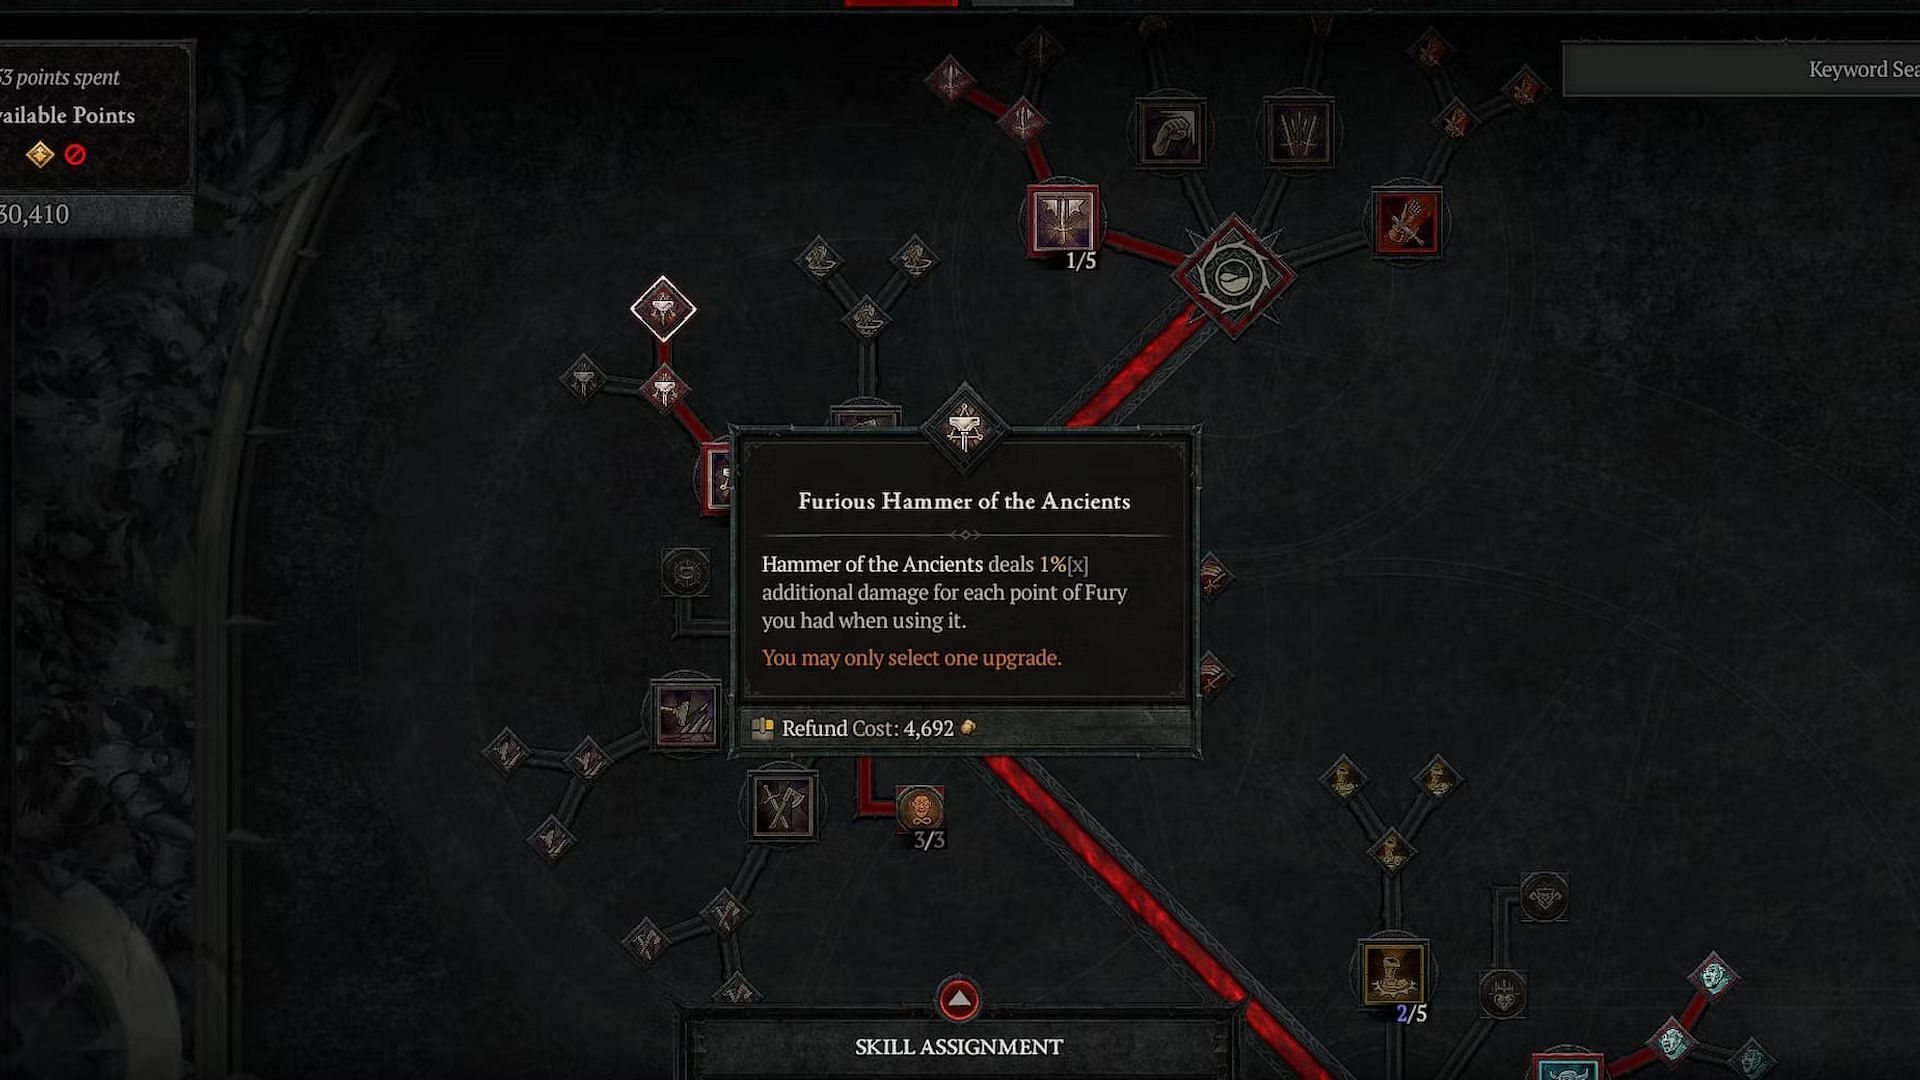 You must fully upgrade the Hammer of the Ancients skill (Image via Diablo 4)